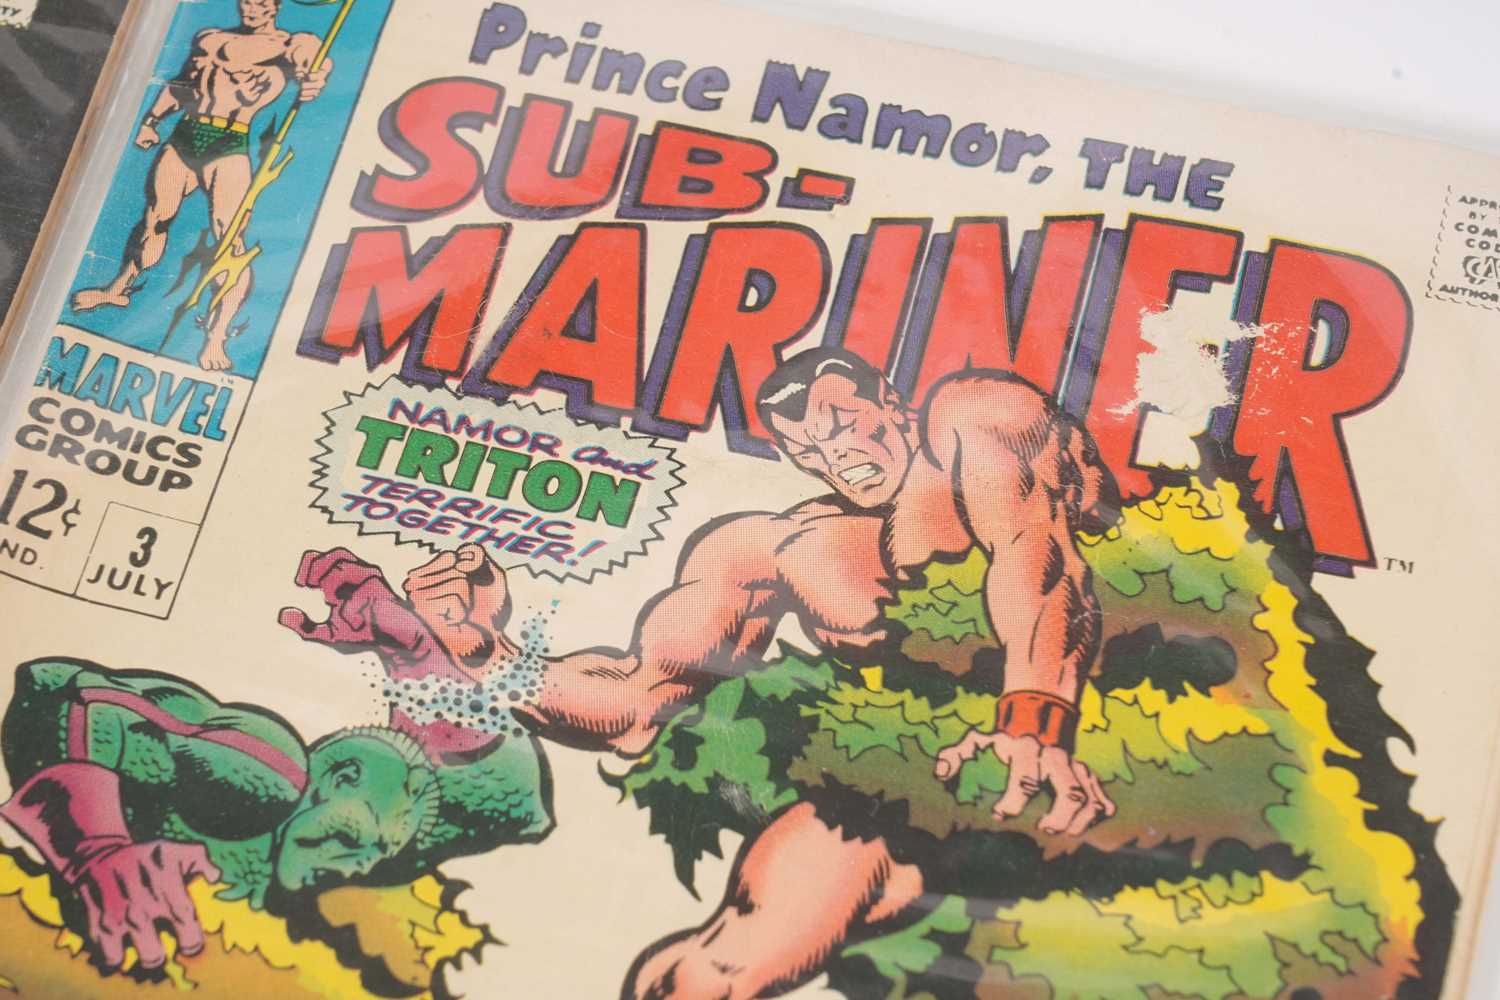 Prince Namor, The Sub-Mariner by Marvel Comics - Image 7 of 7